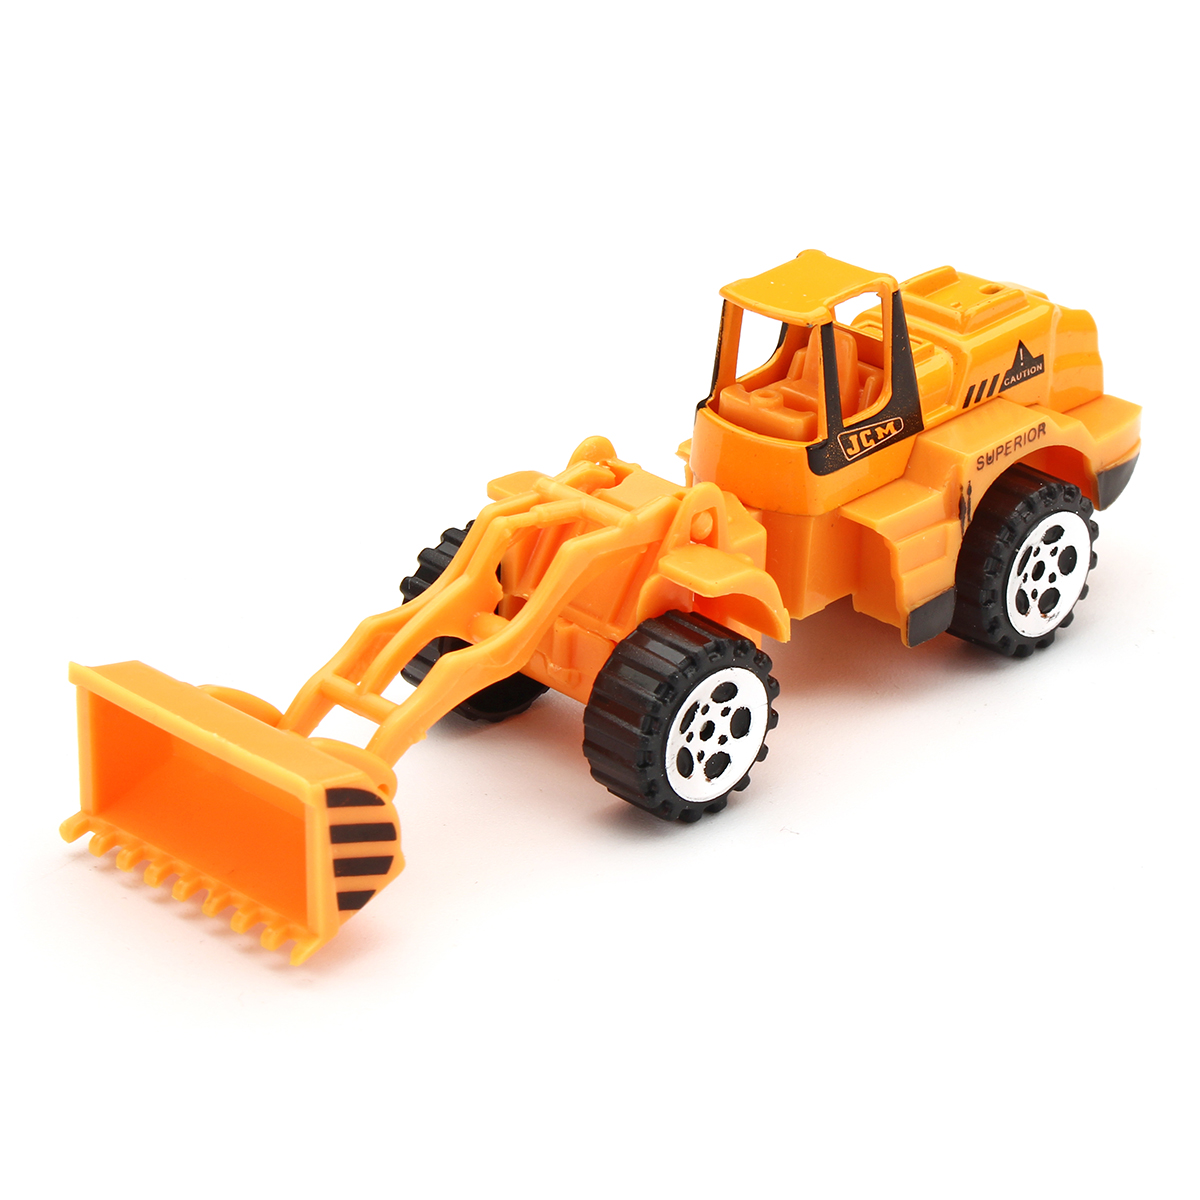 4in1-Kids-Toy-Recovery-Vehicle-Tow-Truck-Lorry-Low-Loader-Diecast-Model-Toys-Construction-Xmas-1414450-5